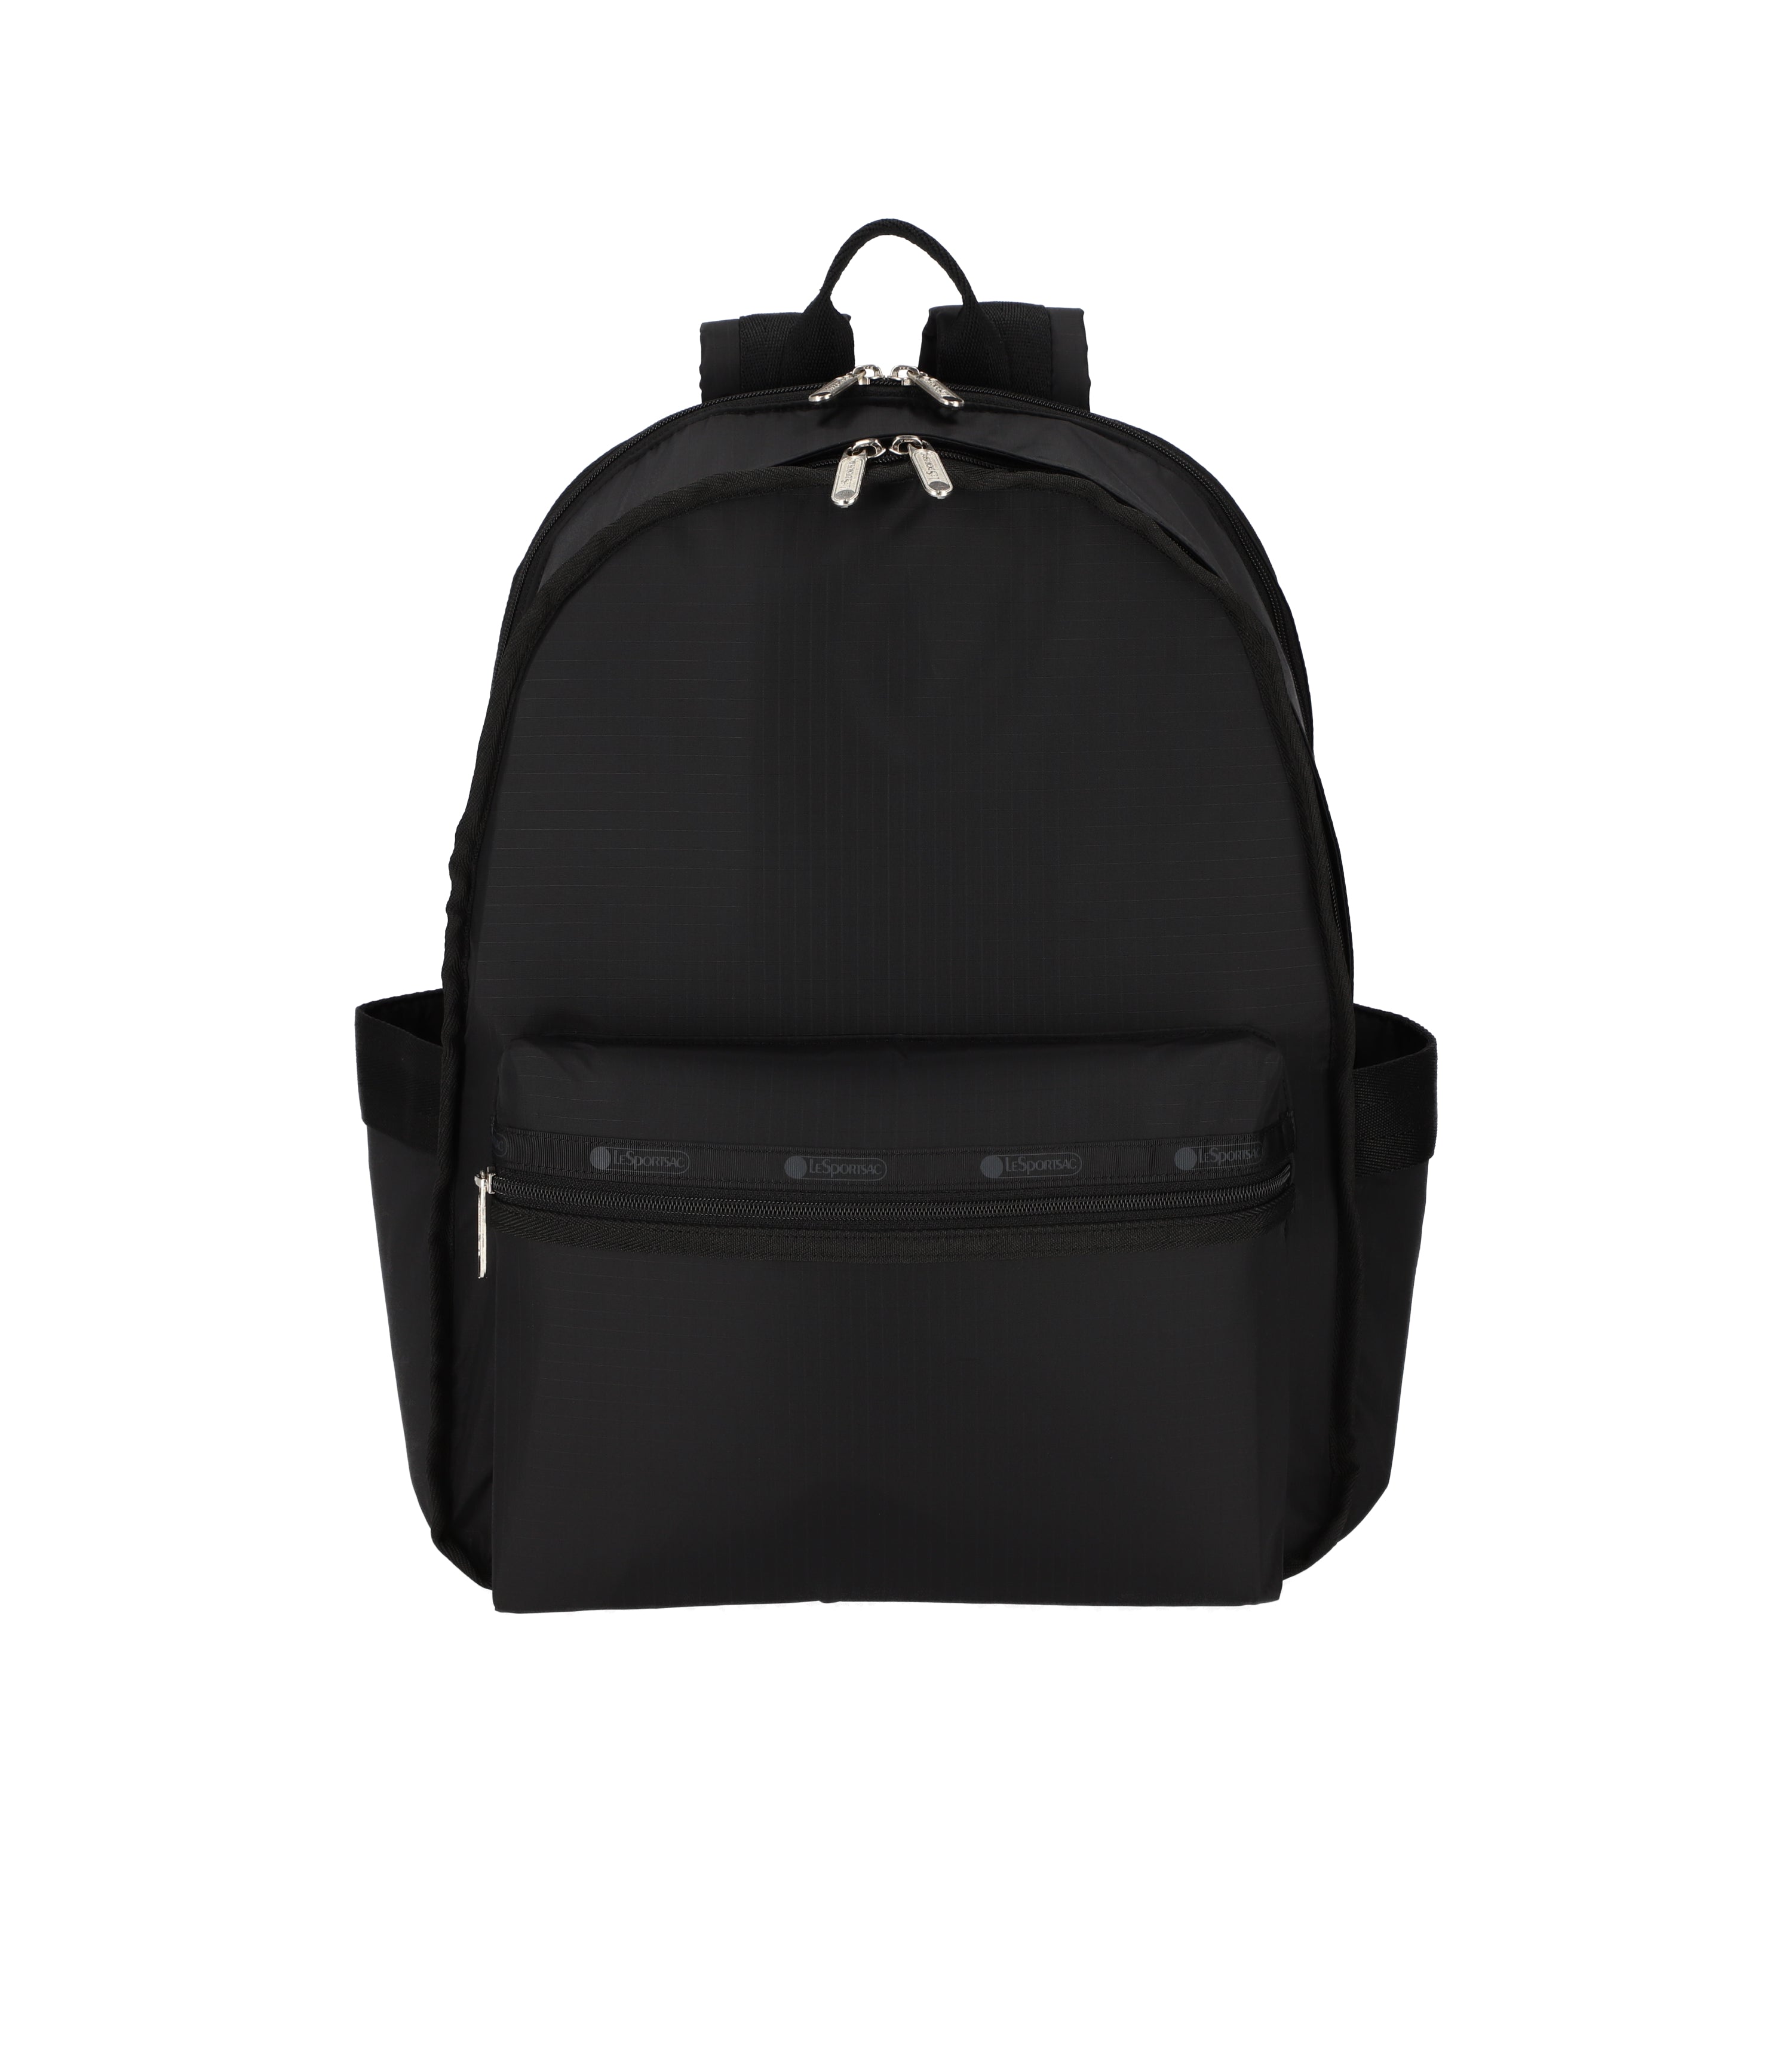 Route Backpack - Black solid